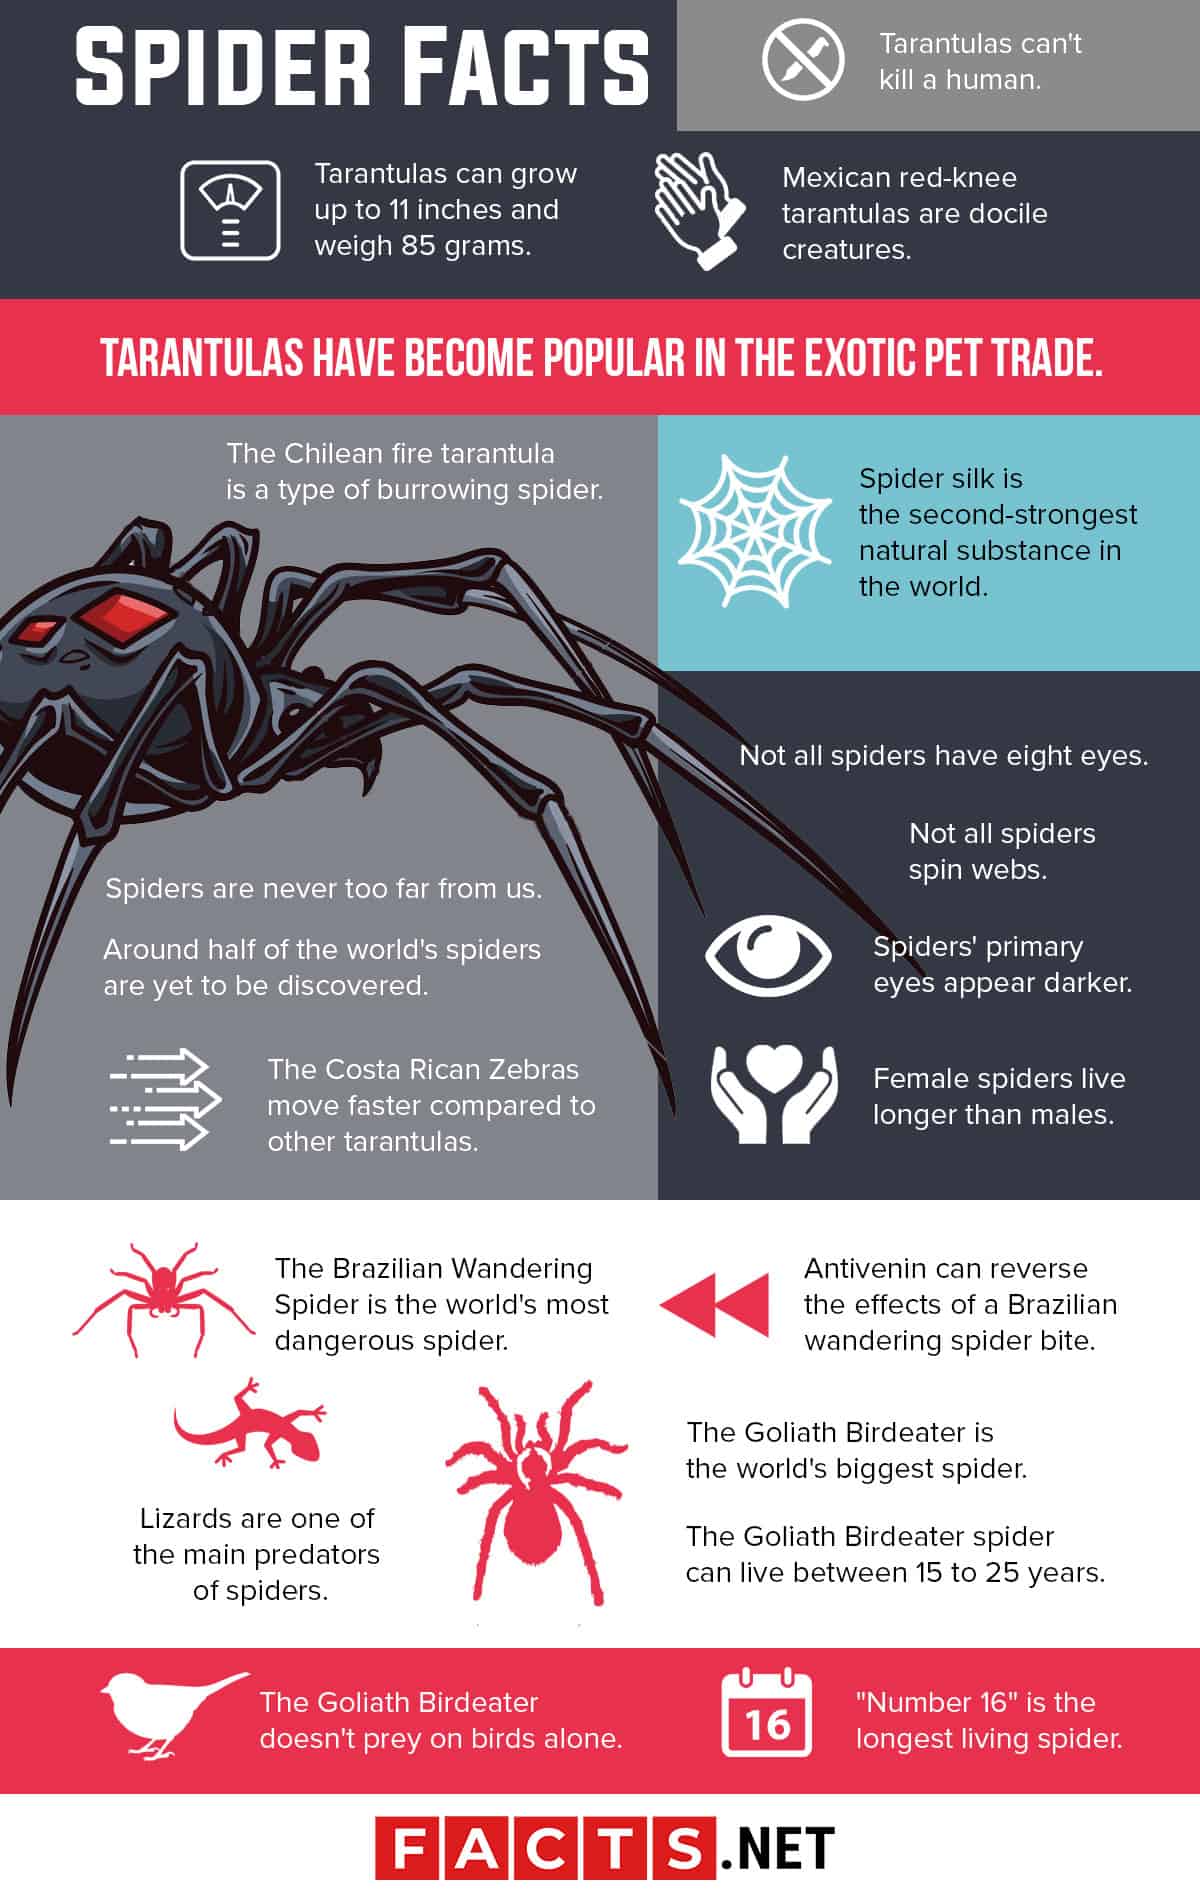 7 pholcid spider facts you need to know - Discover Wildlife